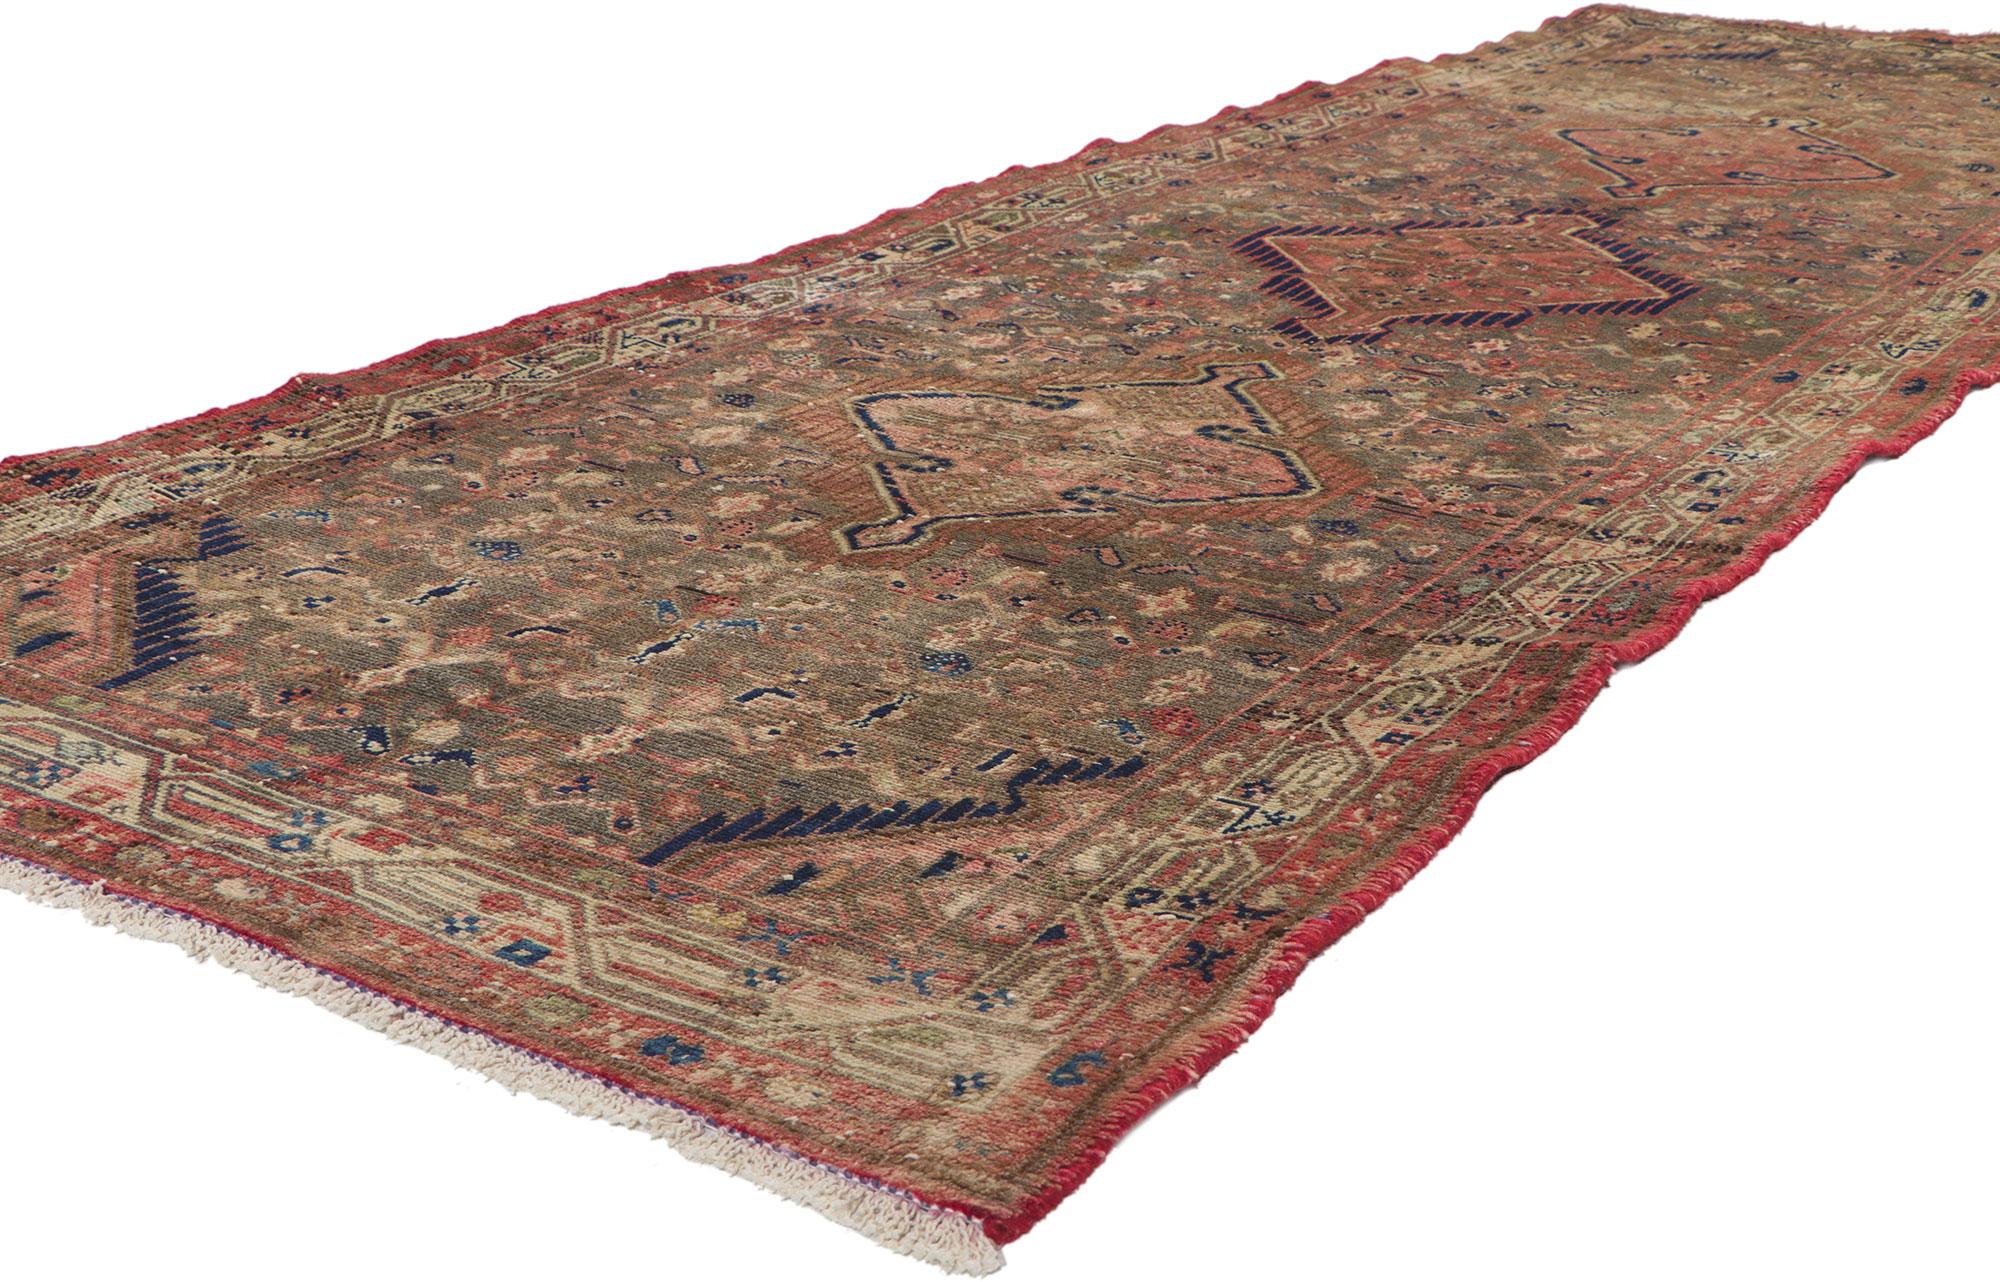 61136 Vintage Persian Hamadan runner, 03'04 x 09'11.
With its rugged beauty and rustic sensibility, this hand knotted wool vintage Persian Hamadan runner will take on a curated lived-in look that feels timeless while imparting a sense of warmth and